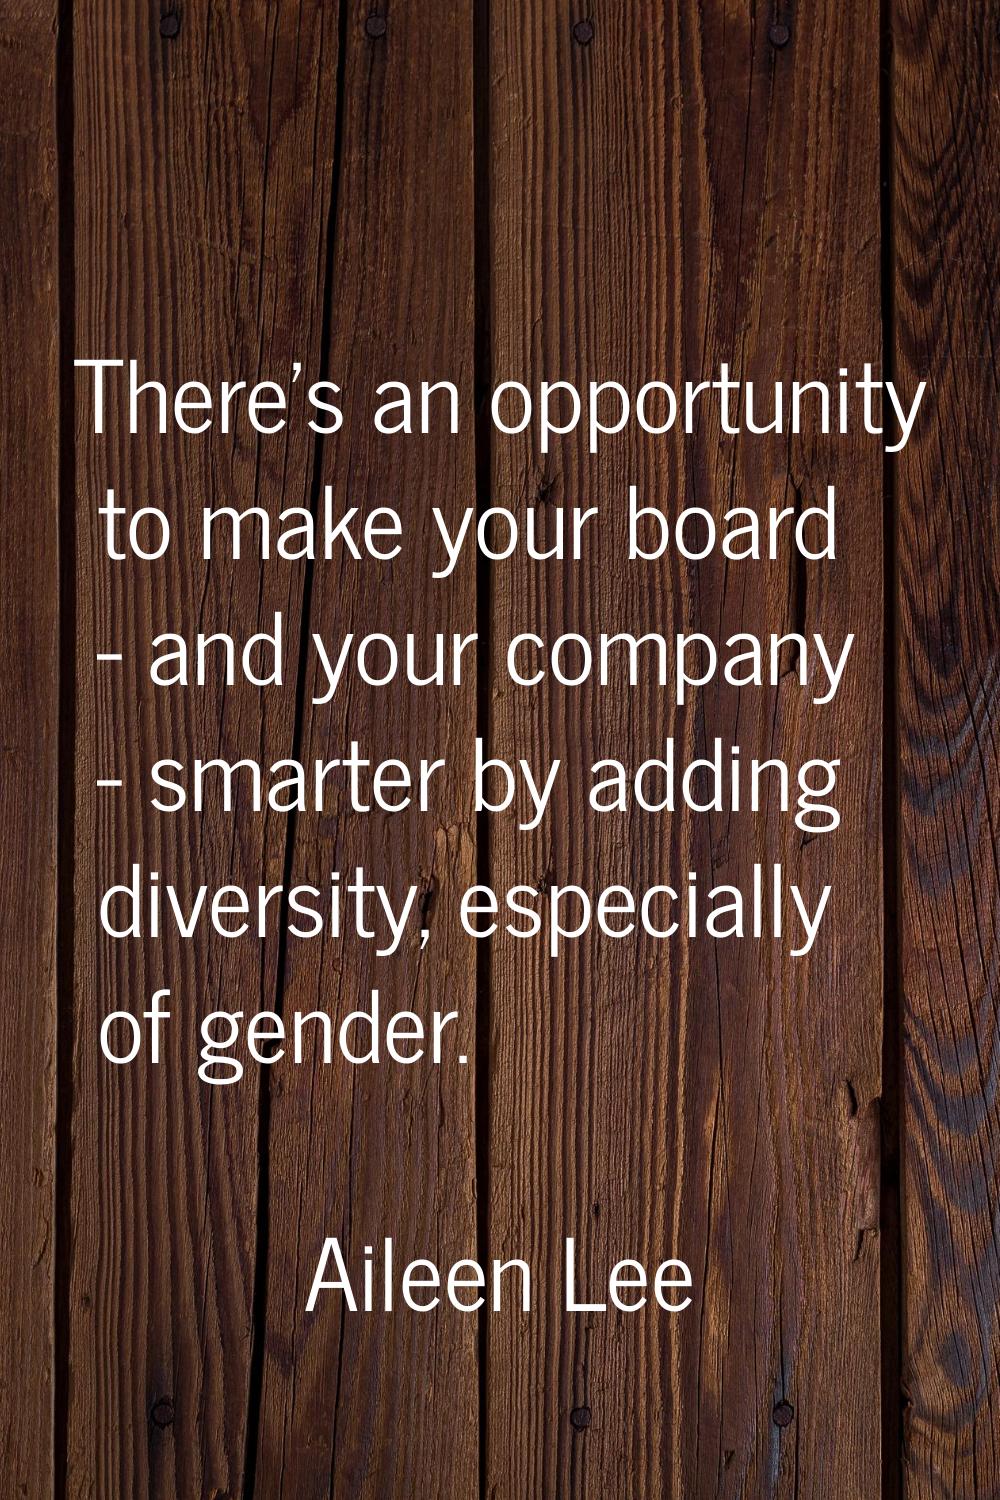 There's an opportunity to make your board - and your company - smarter by adding diversity, especia